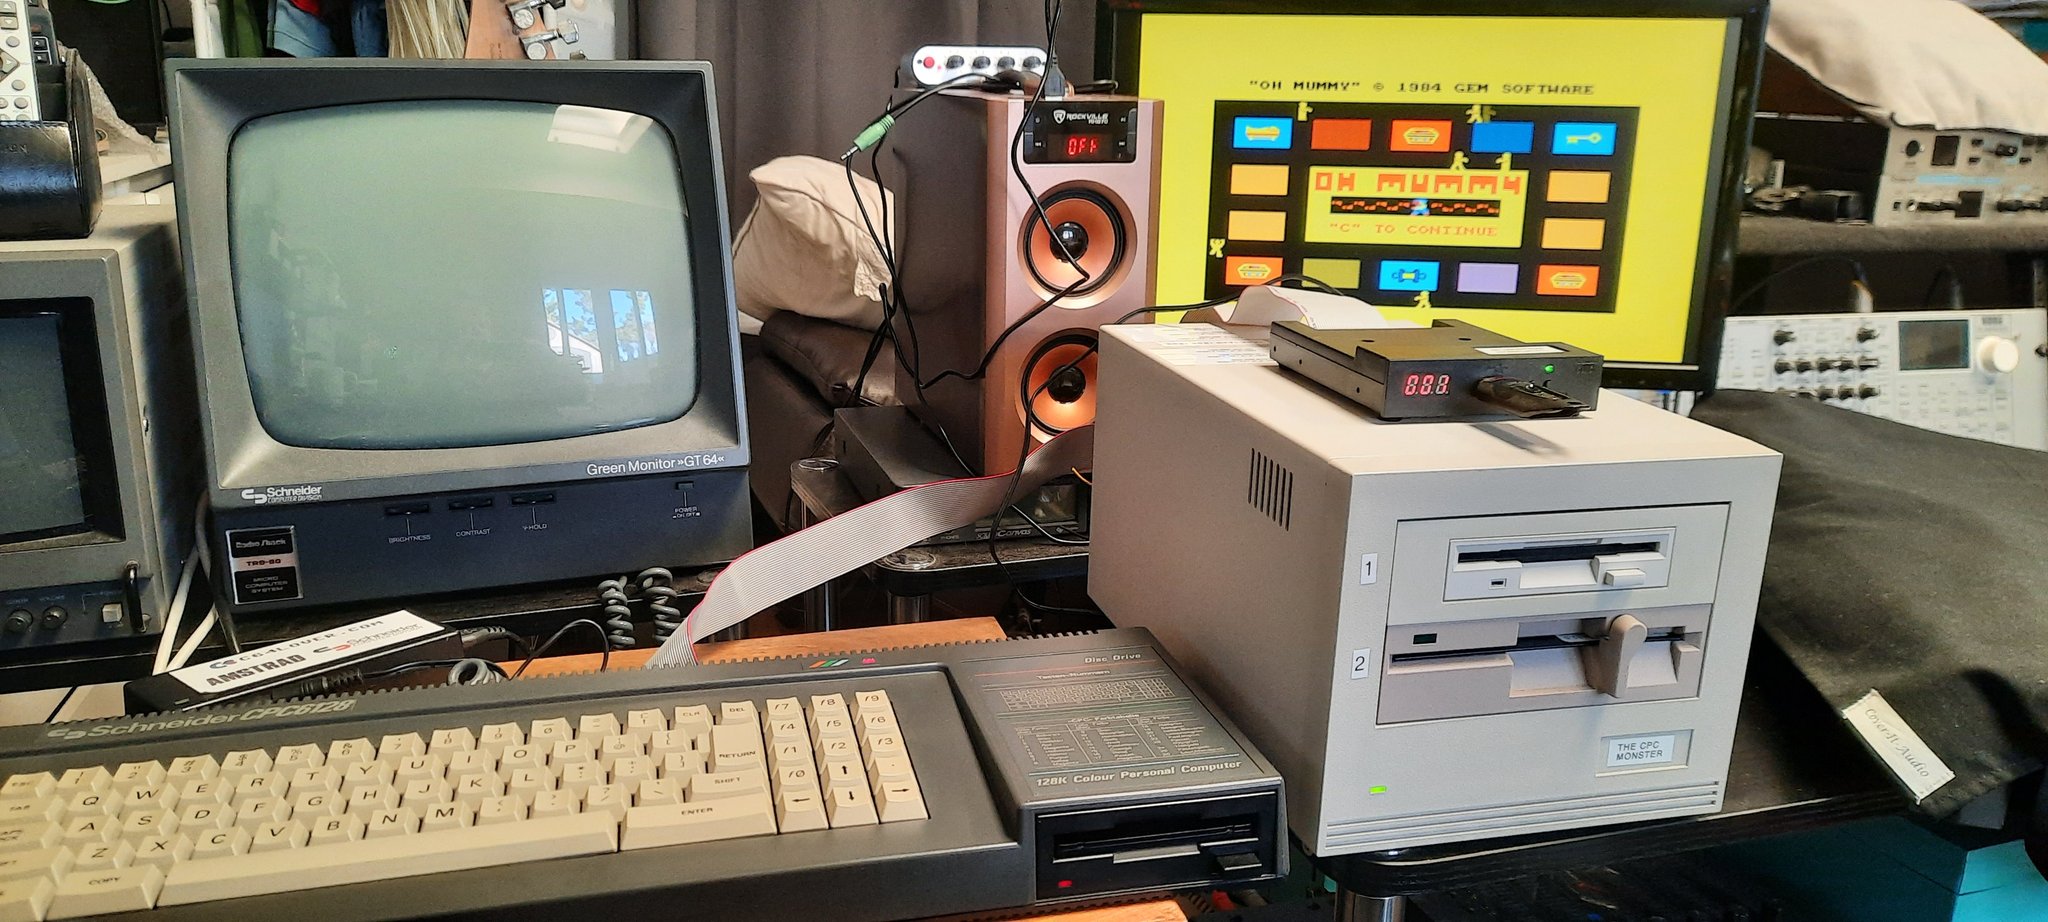 Amstrad CPC and disk drive tower